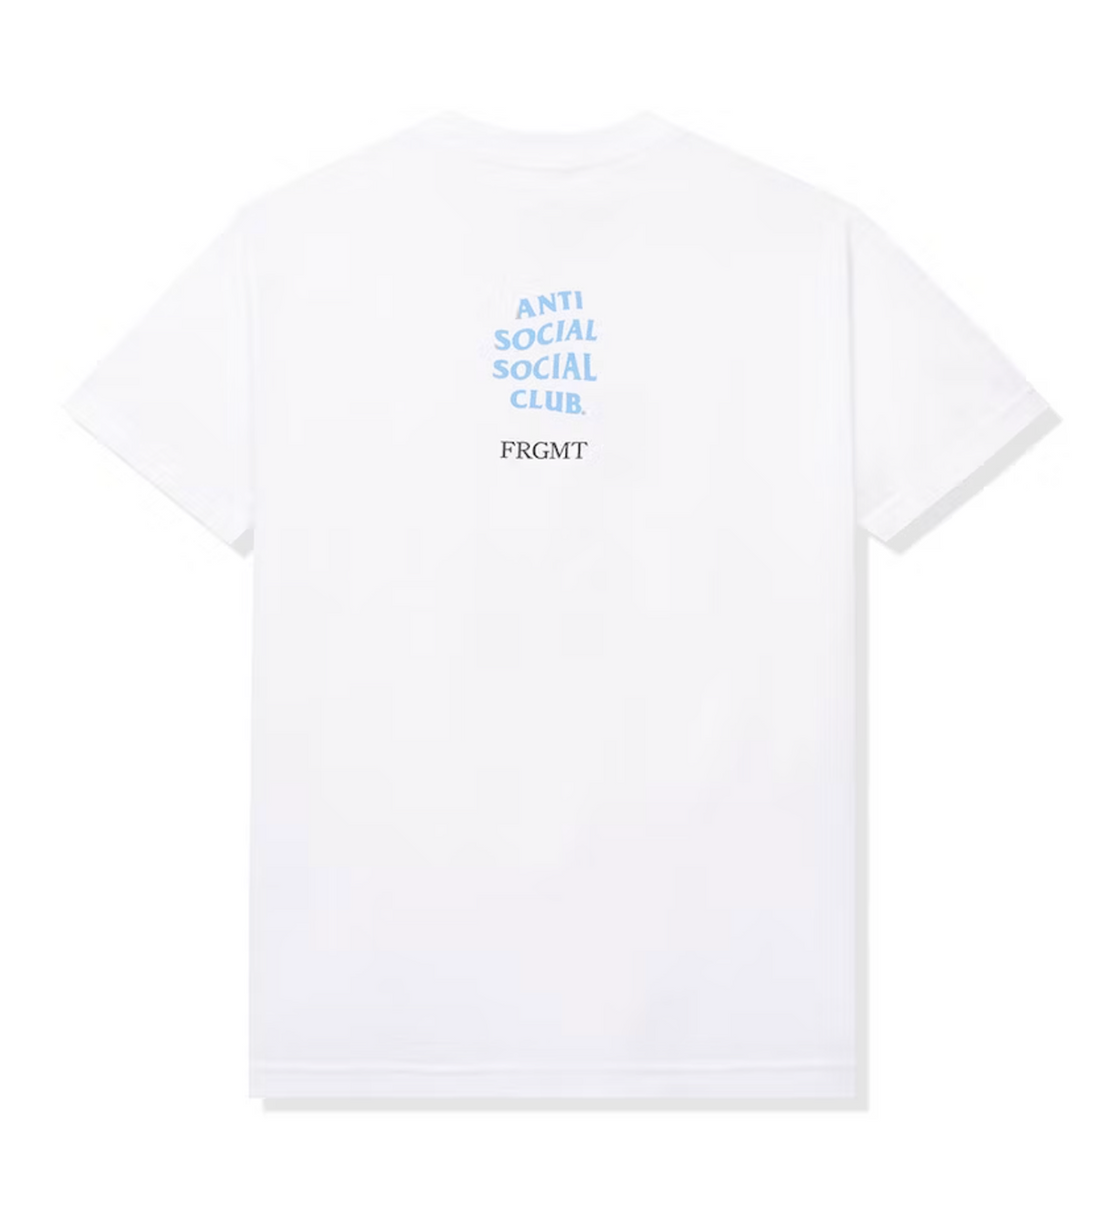 ASSC Fragment Interference Blue White Tee